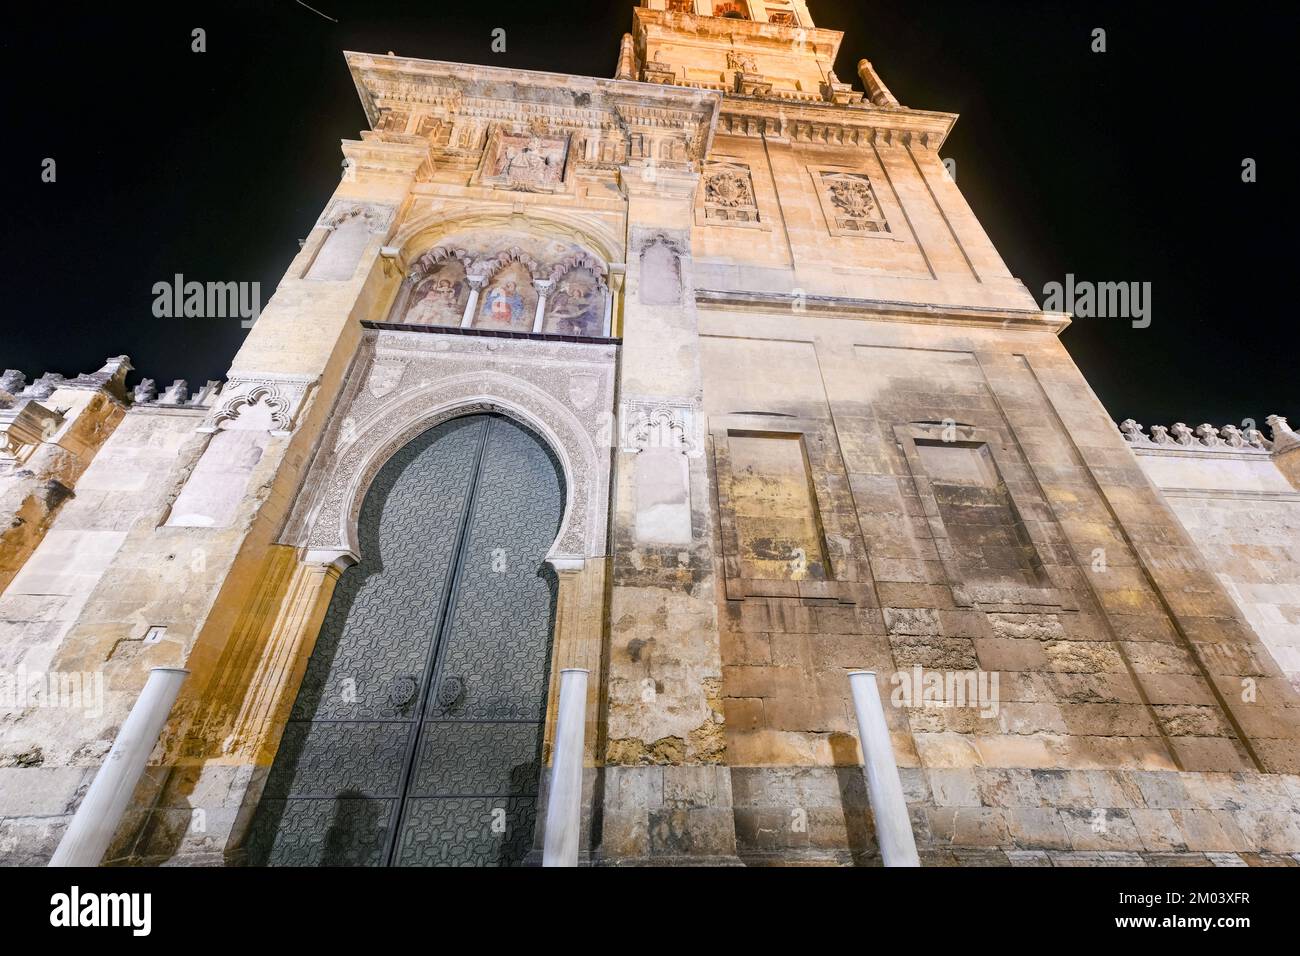 Converted minaret belltower of the Mosque Cathedral of Cordoba, Andalucia, Spain Stock Photo